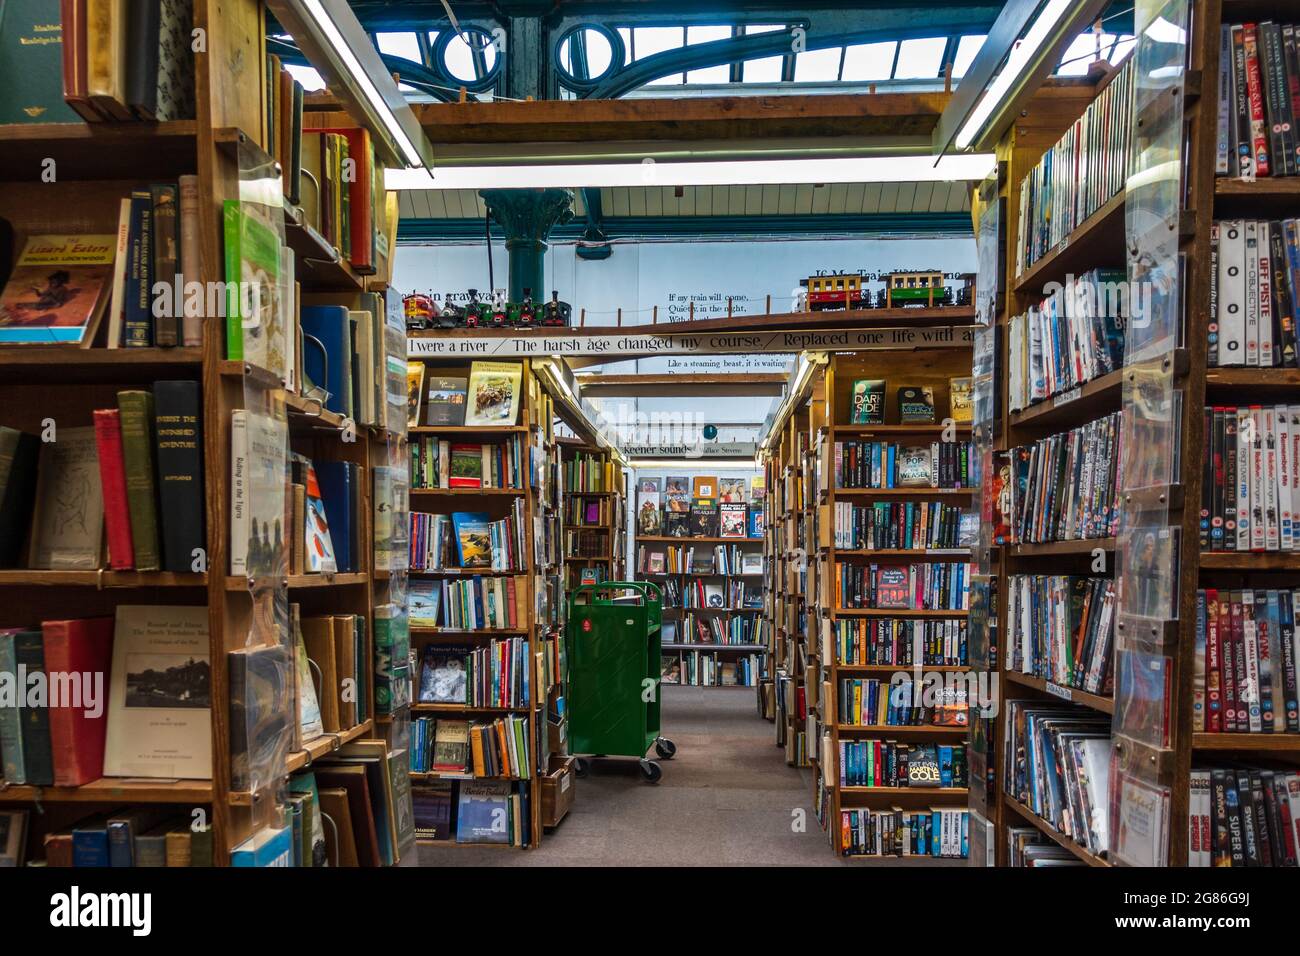 Barter Books, a former railway station and one of the largest secondhand bookshops in Britain, in Alnwick, Northumberland, England, Uk Stock Photo